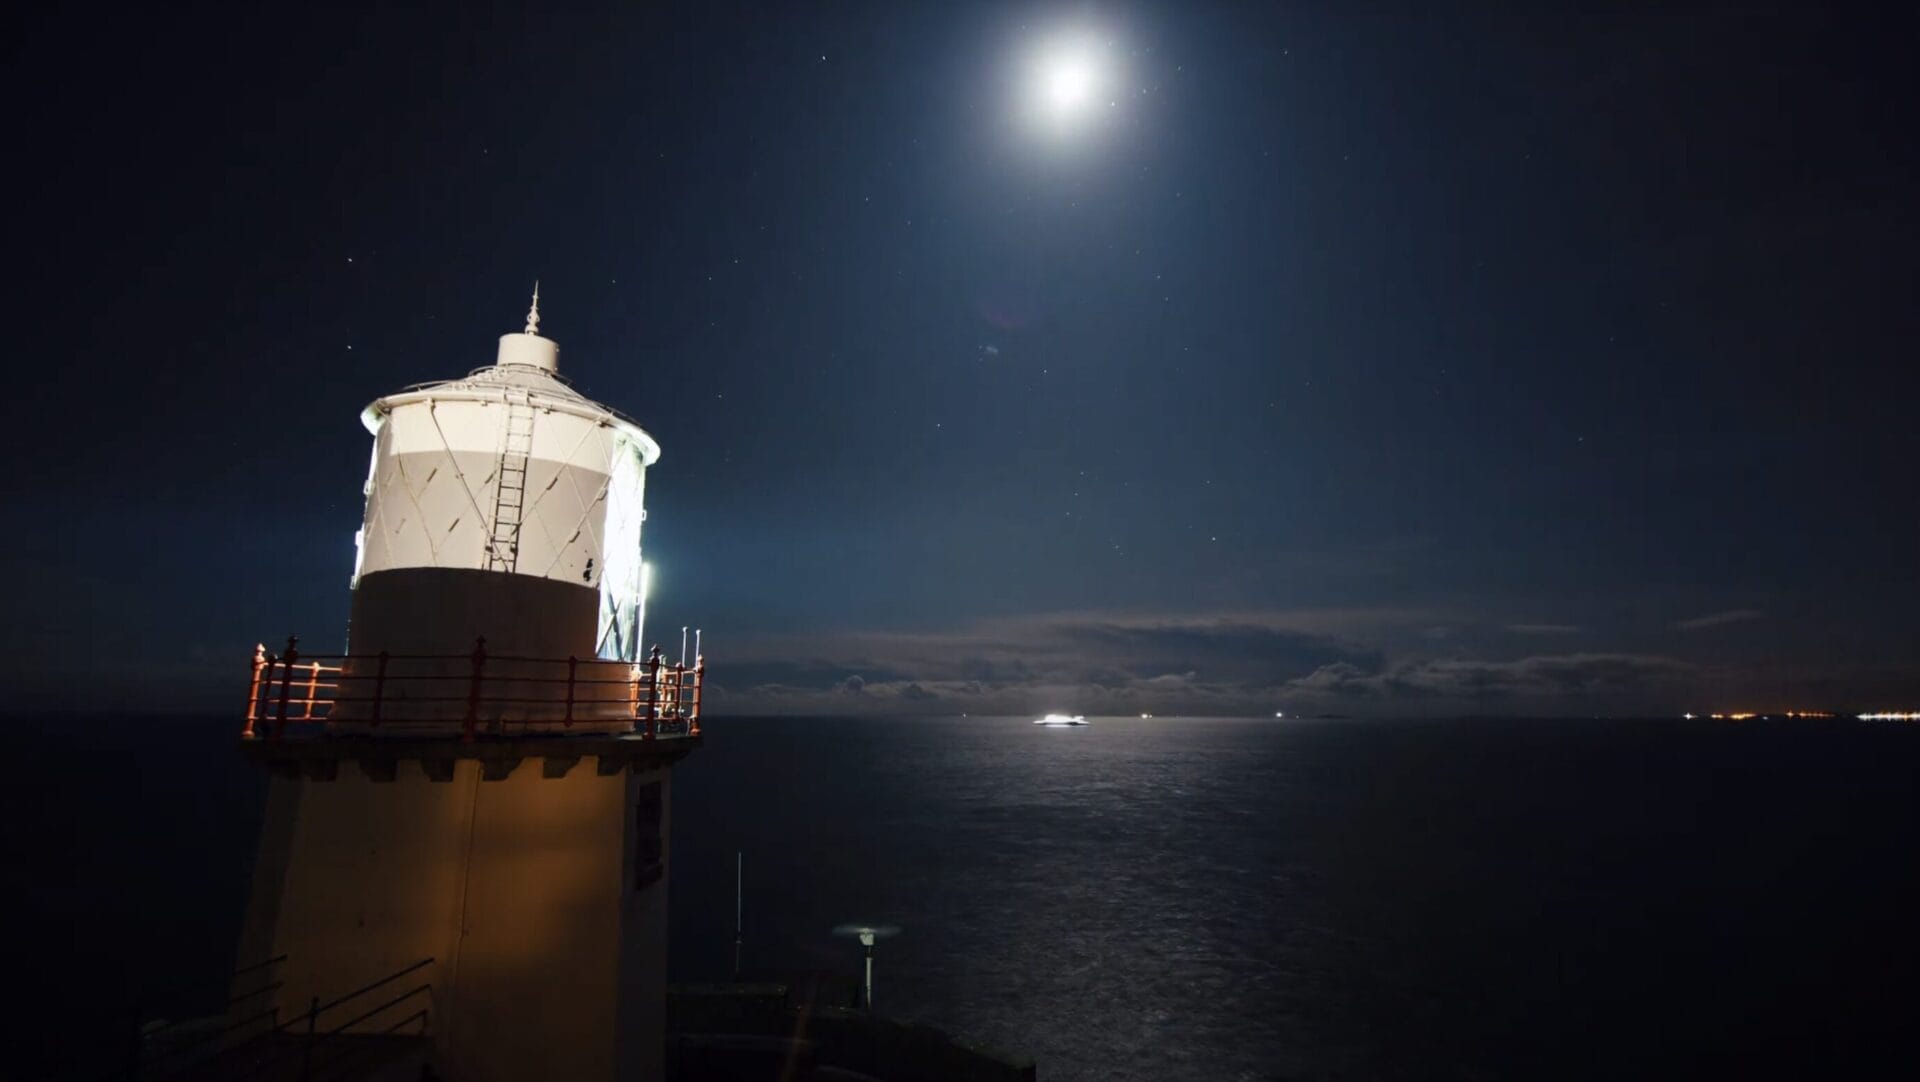 A lighthouse at night with moonlight reflected on the water